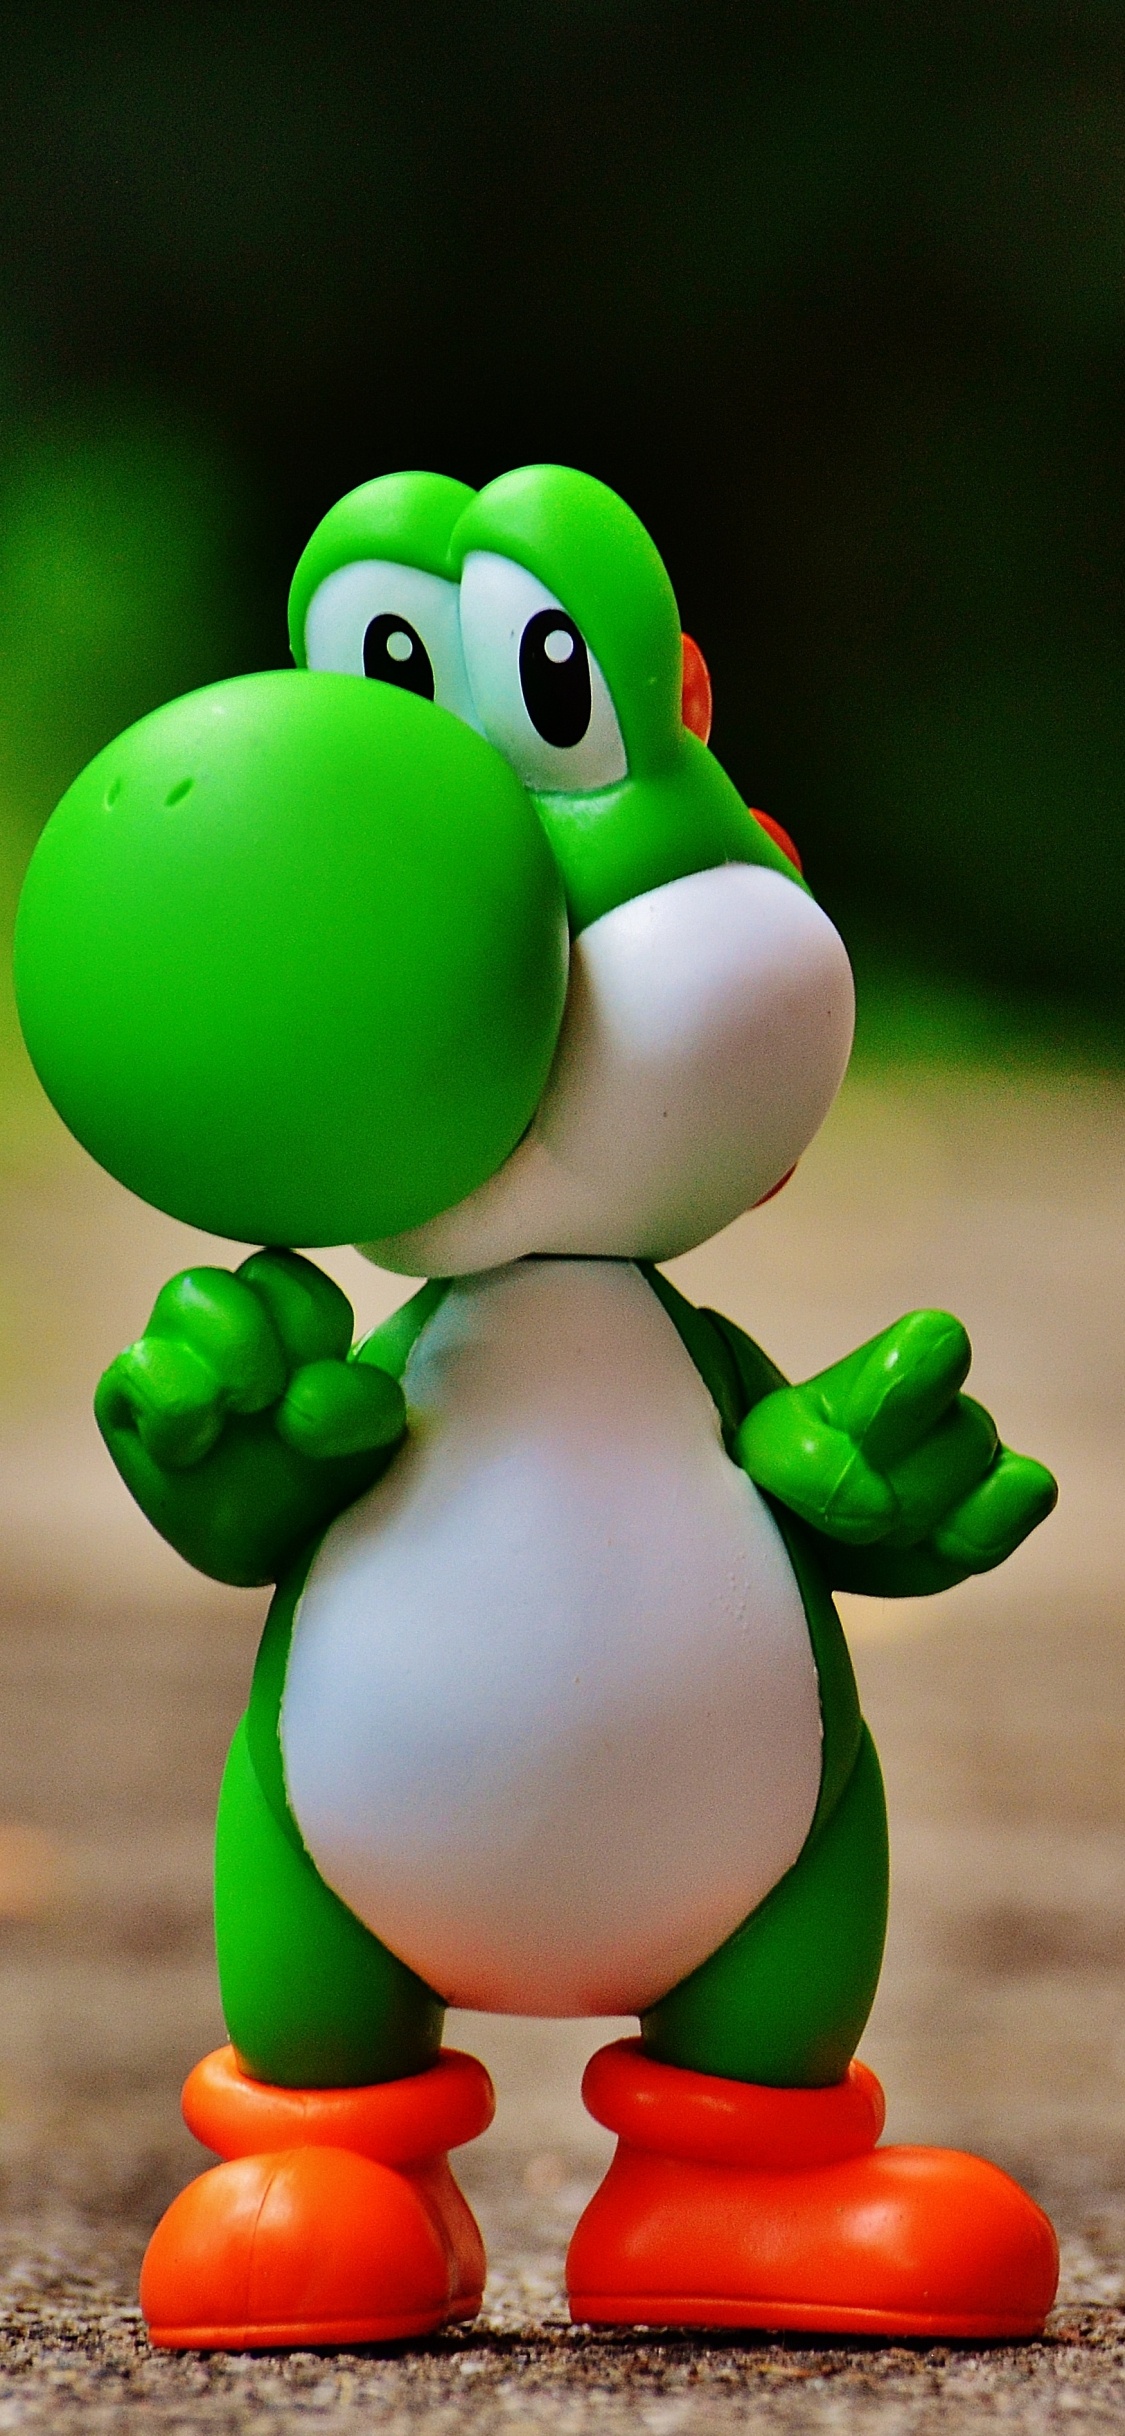 Yoshis Island, Super Mario World, Green, Toy, Action Figure. Wallpaper in 1125x2436 Resolution